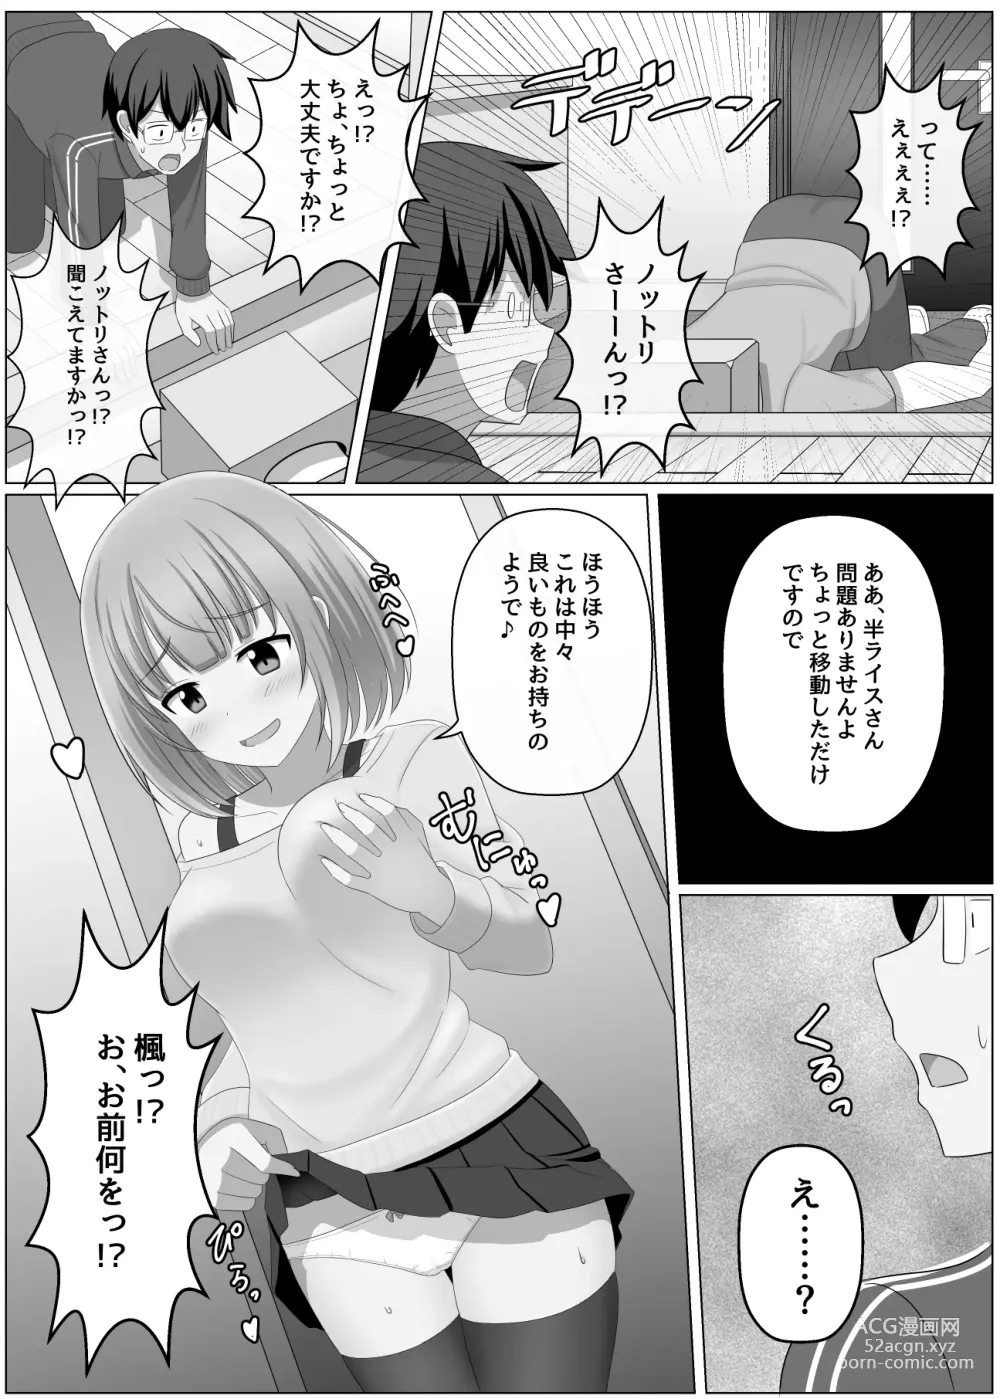 Page 5 of doujinshi Nottori Channel